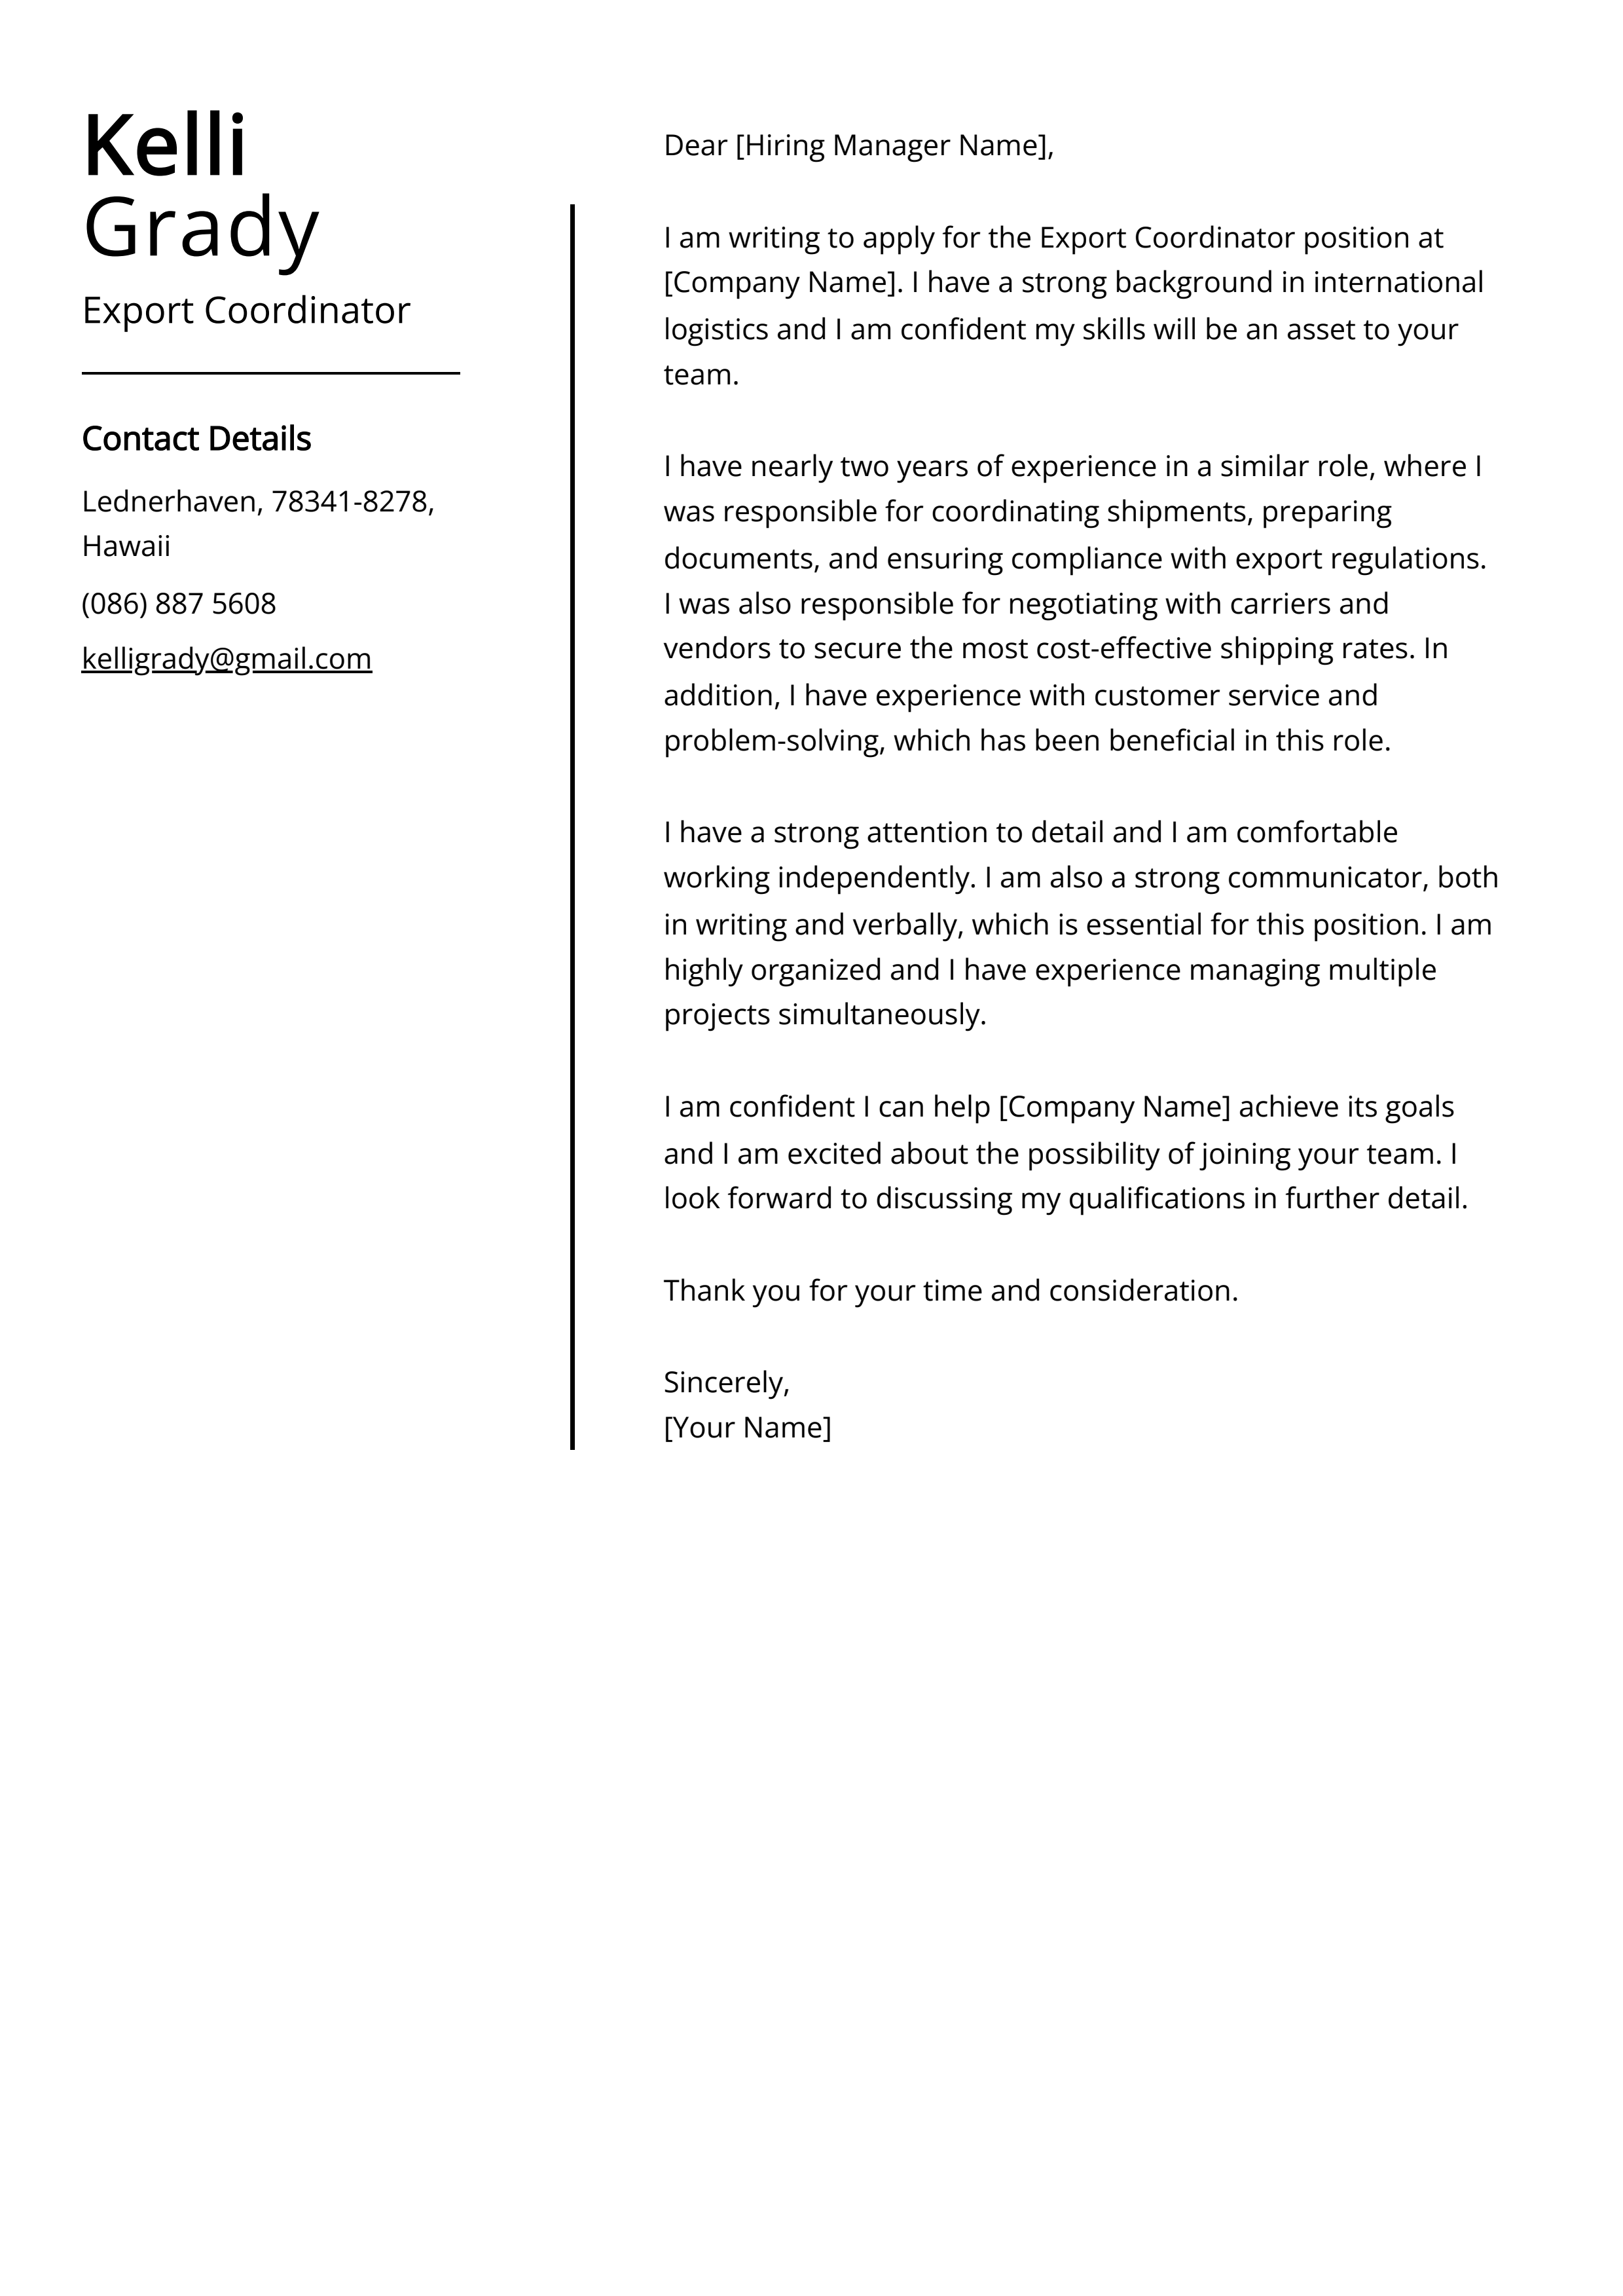 Export Coordinator Cover Letter Example